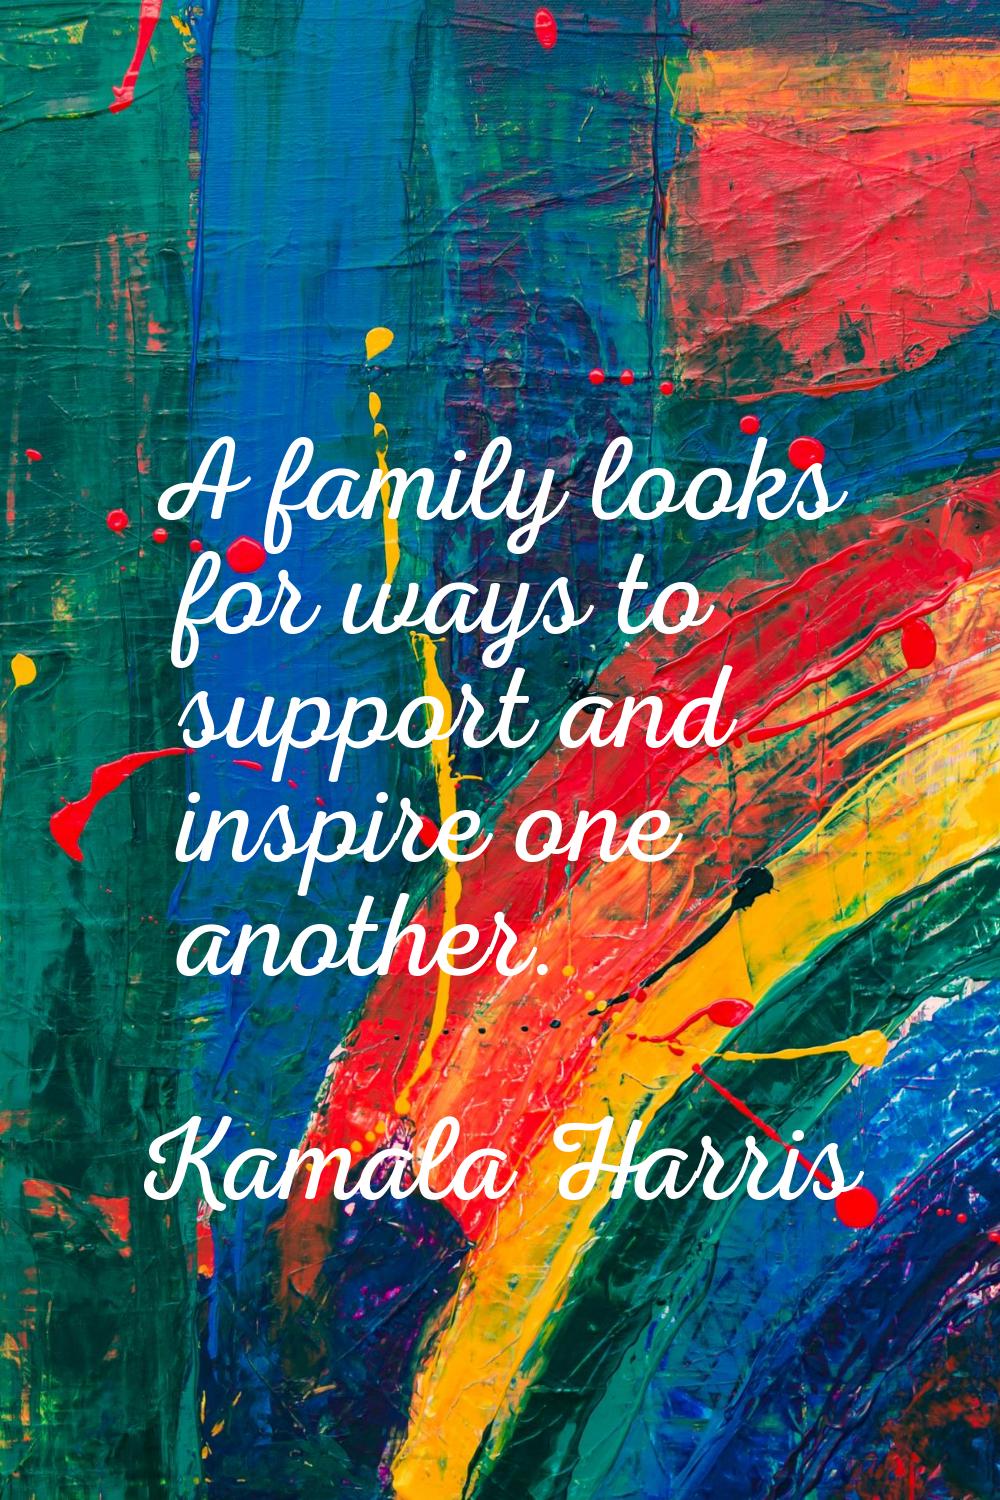 A family looks for ways to support and inspire one another.